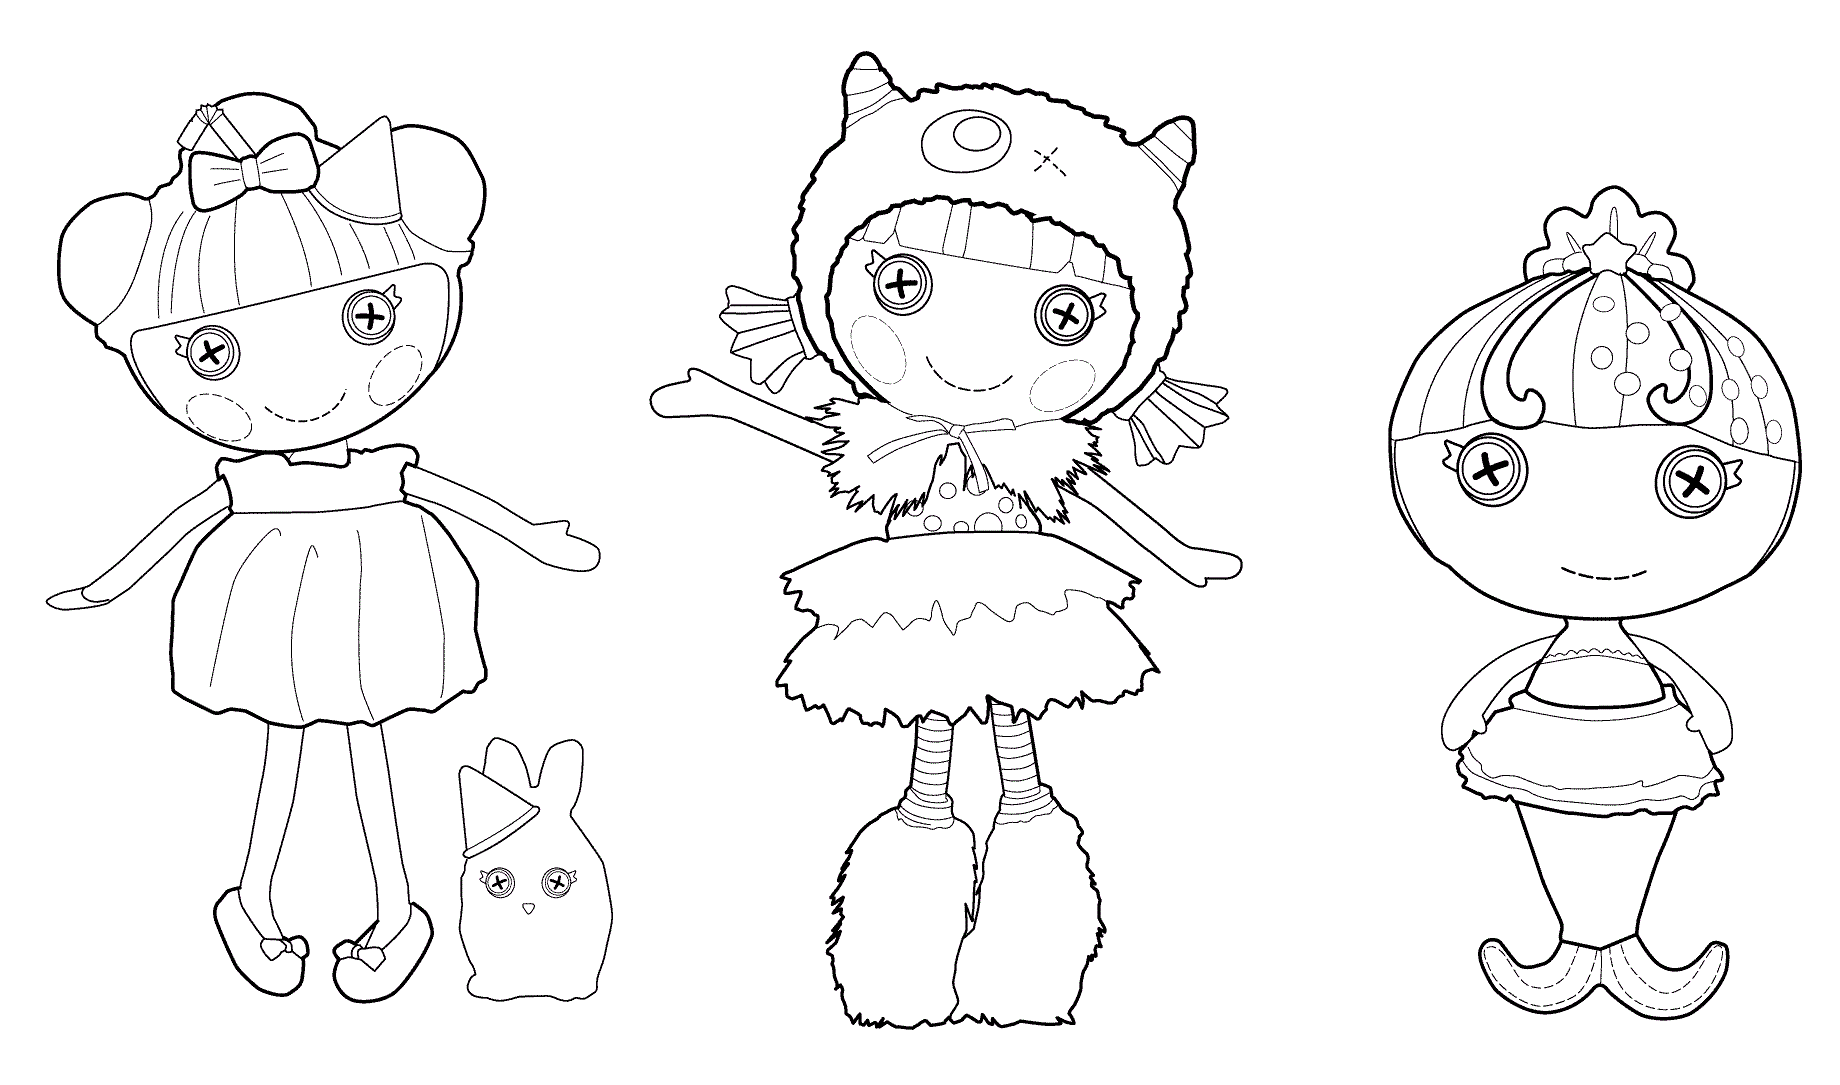 Lalaloopsy And Friends Coloring Page